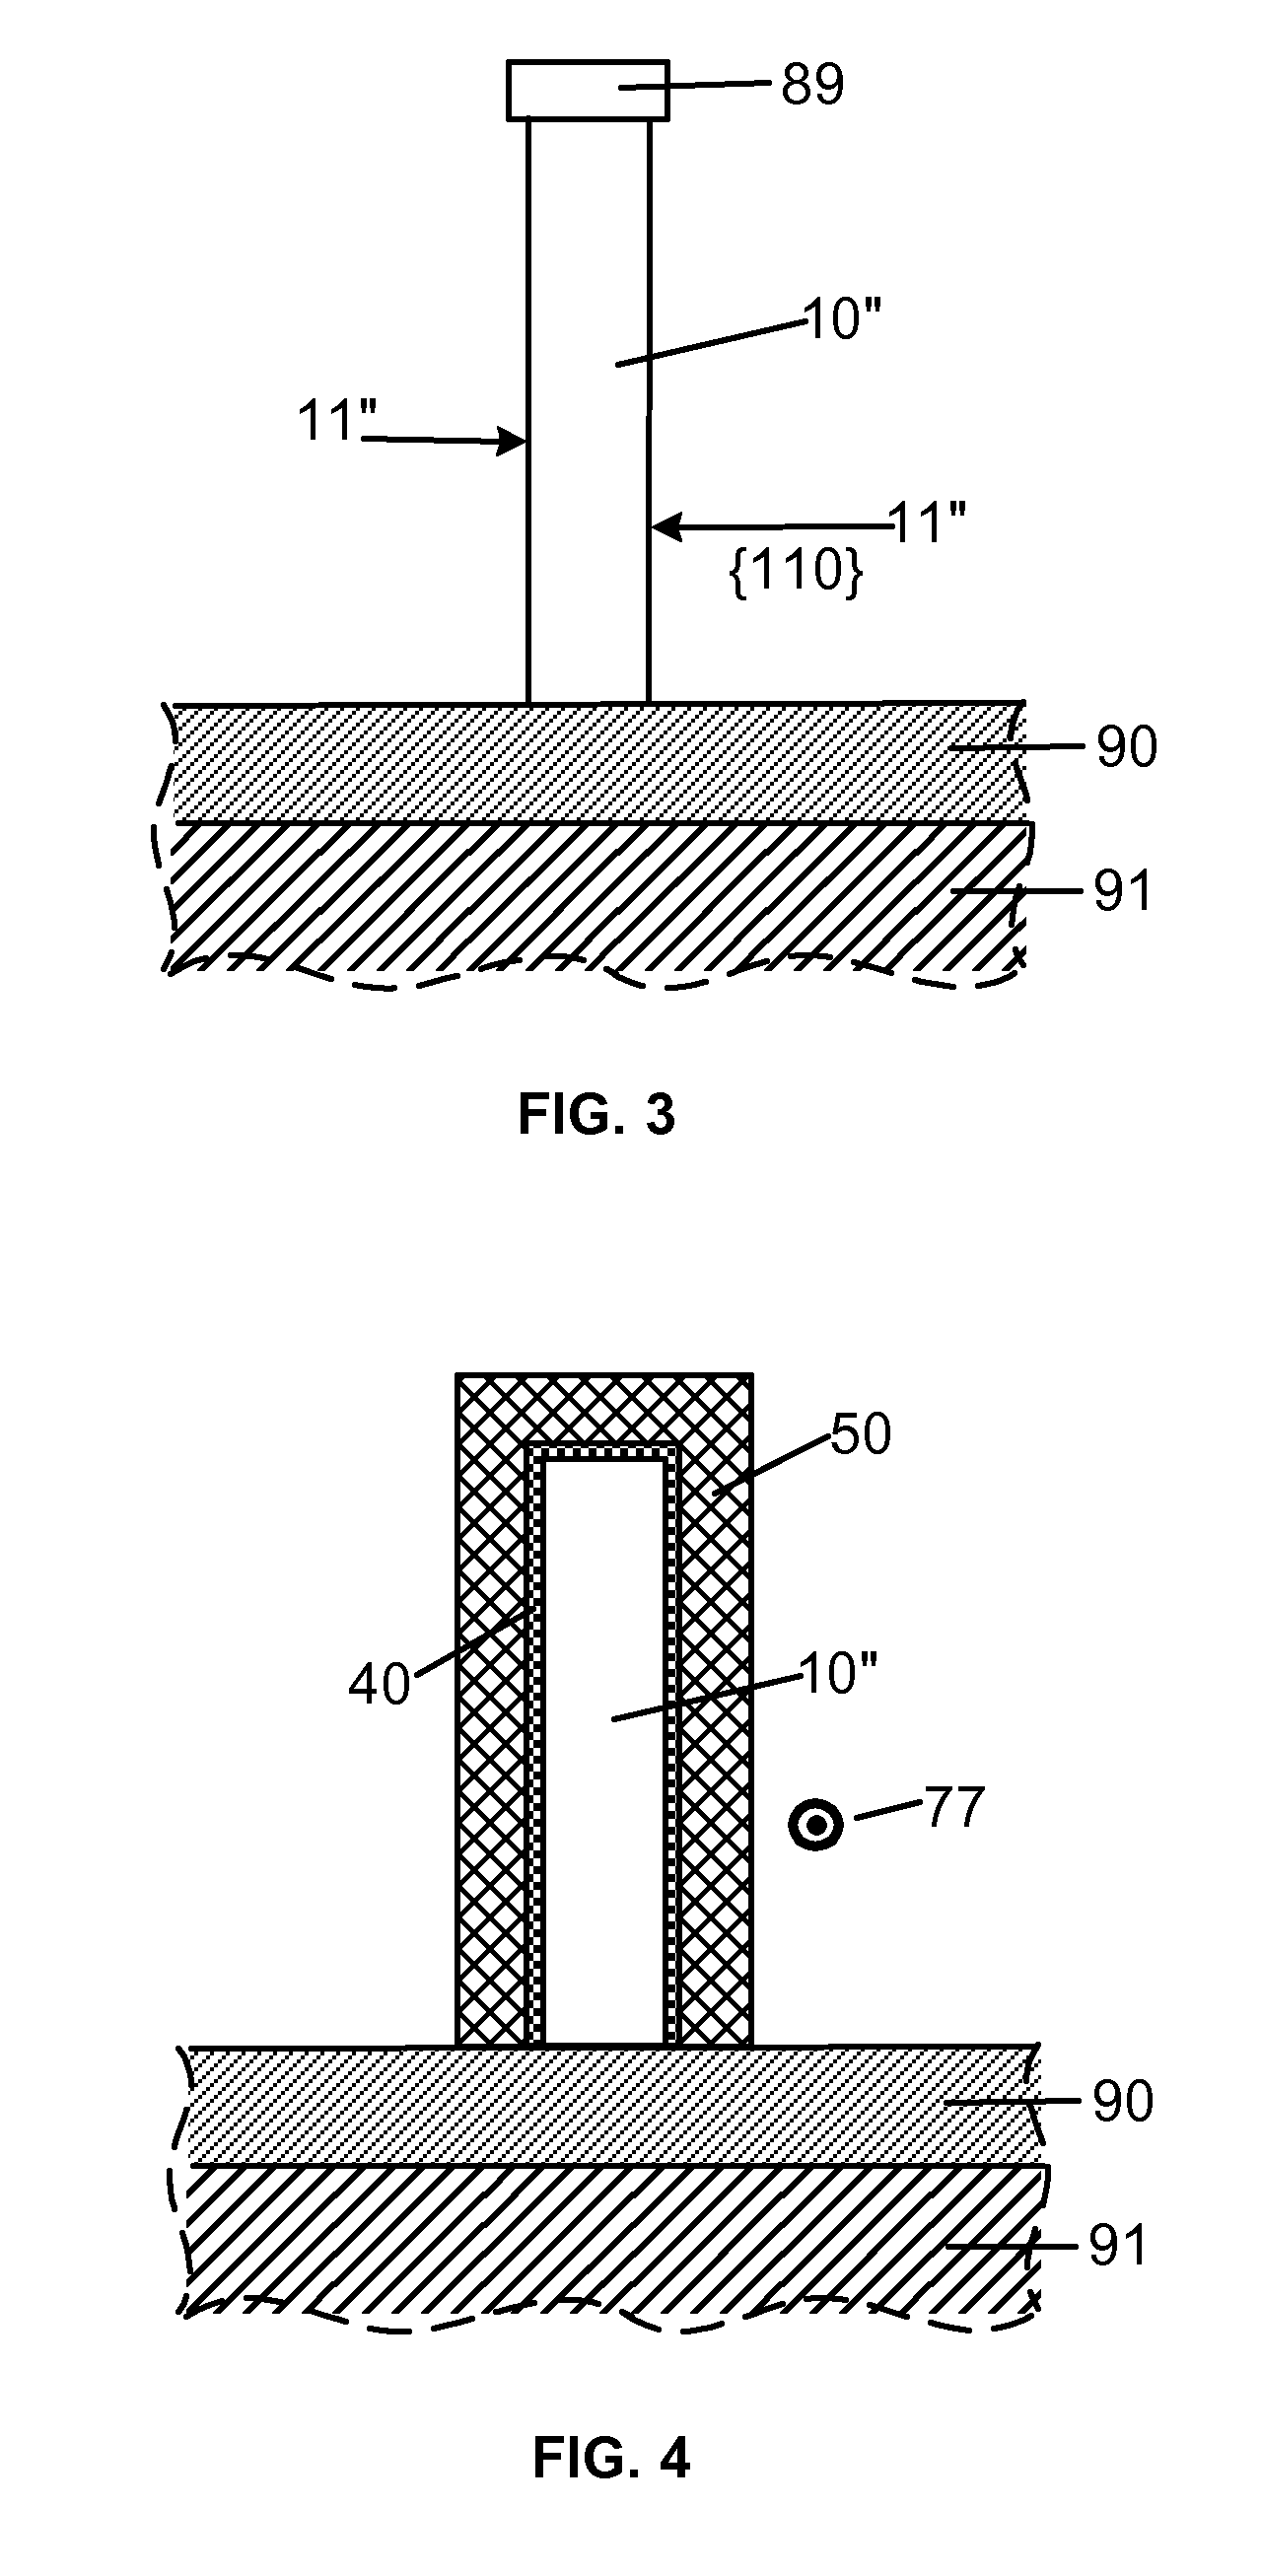 Smooth and vertical semiconductor fin structure